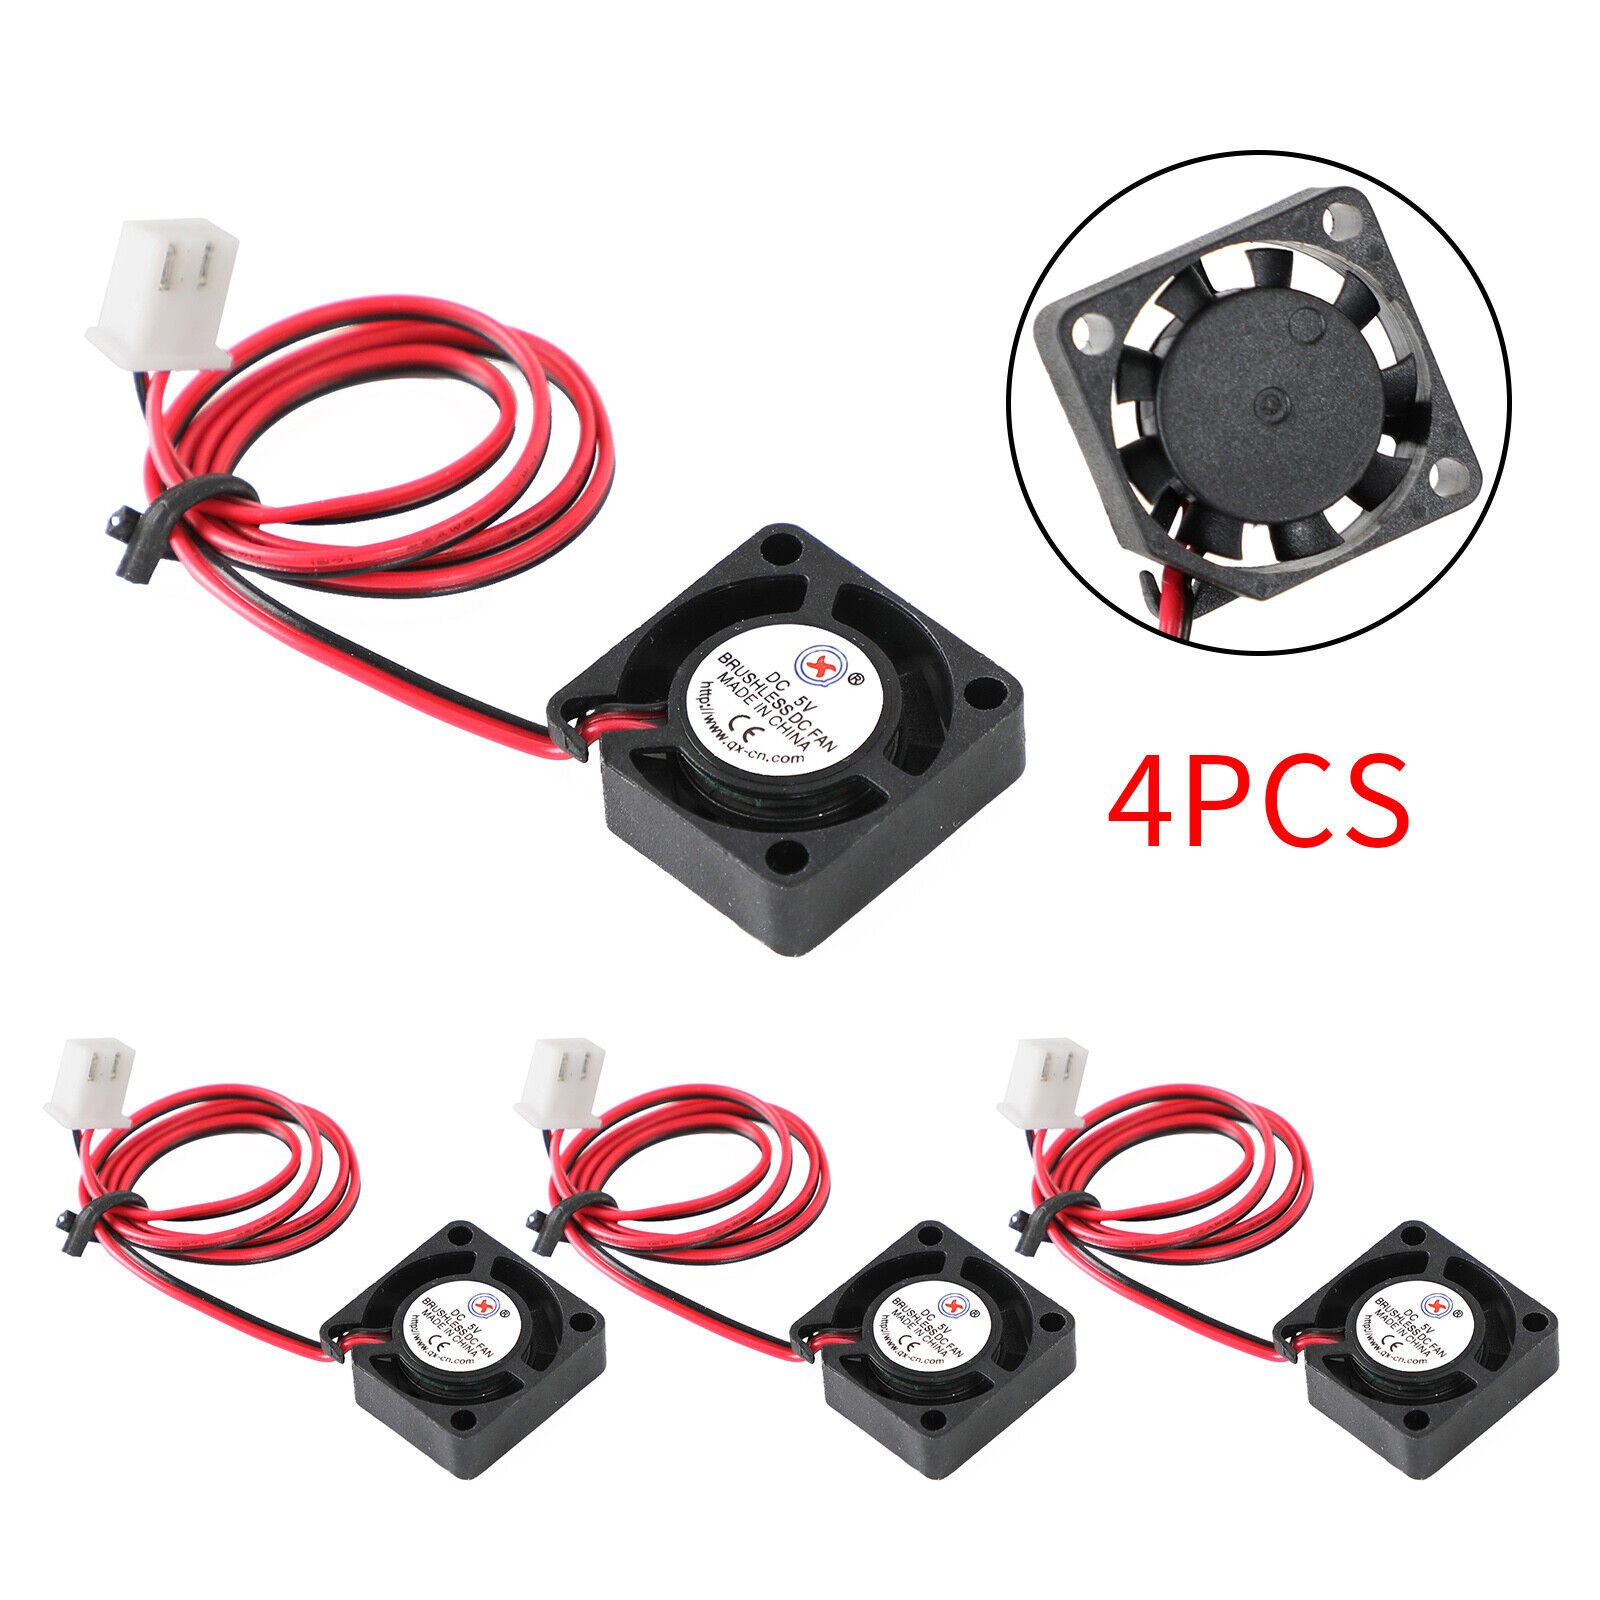 4x Brushless DC Cooling Blower Fan 5V 2006 20x20x6mm Sleeve 2 Pin Wire UE